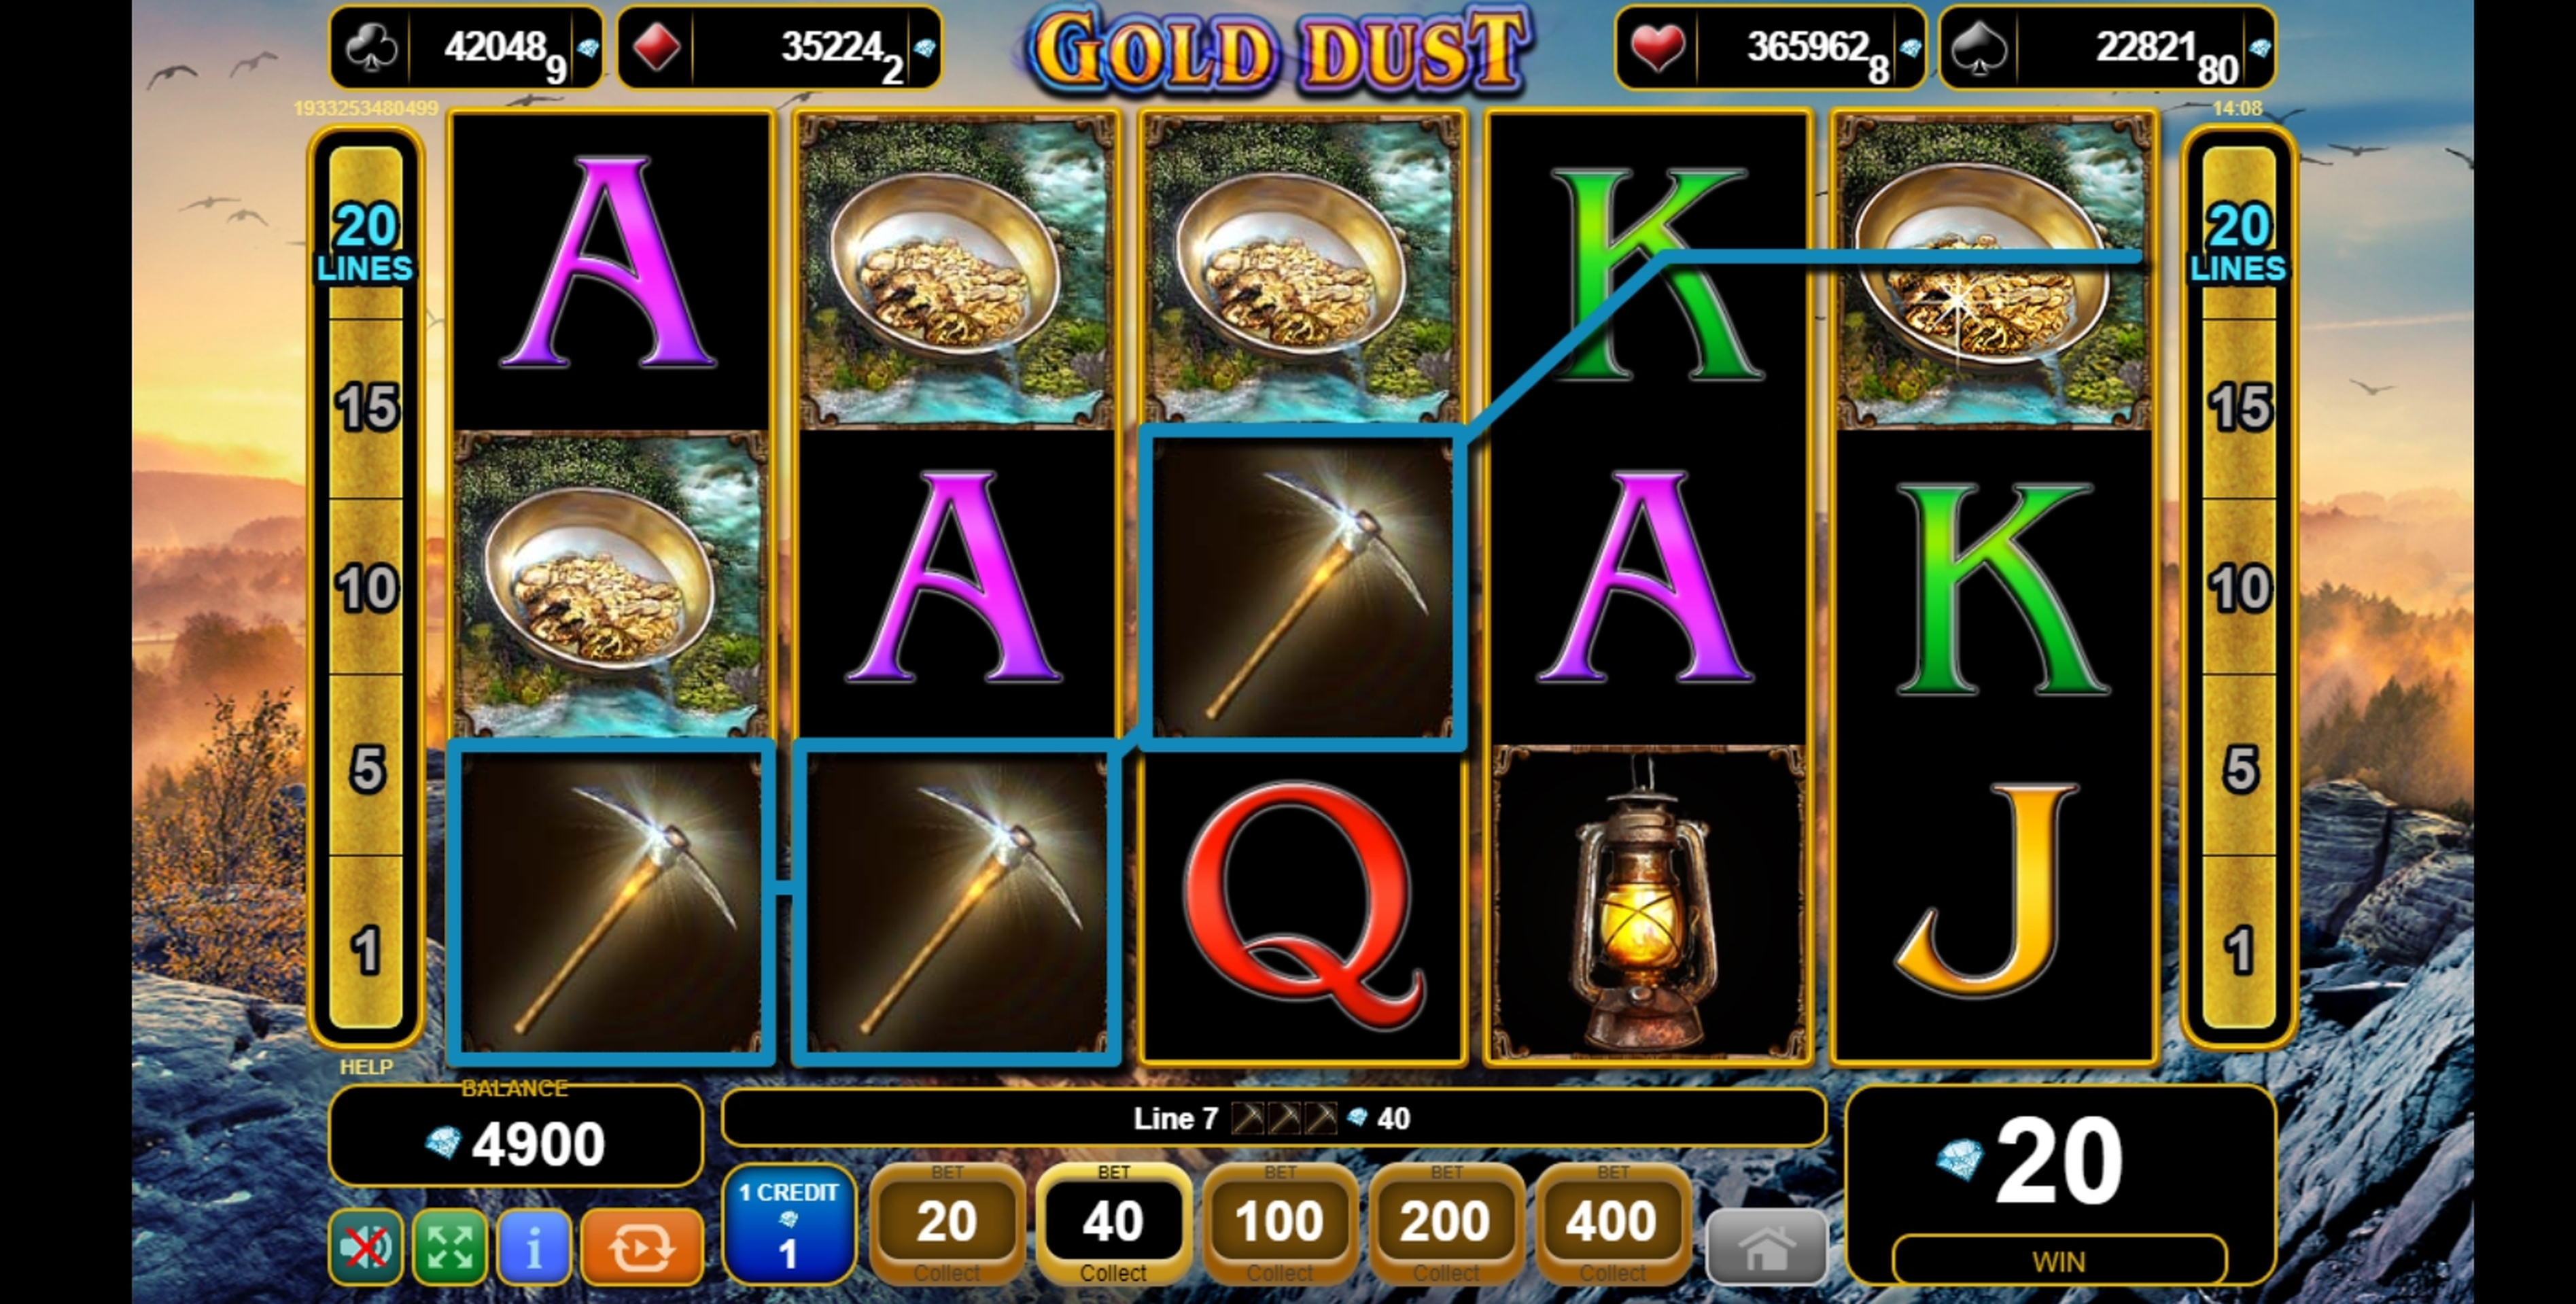 Win Money in Gold Dust Free Slot Game by EGT